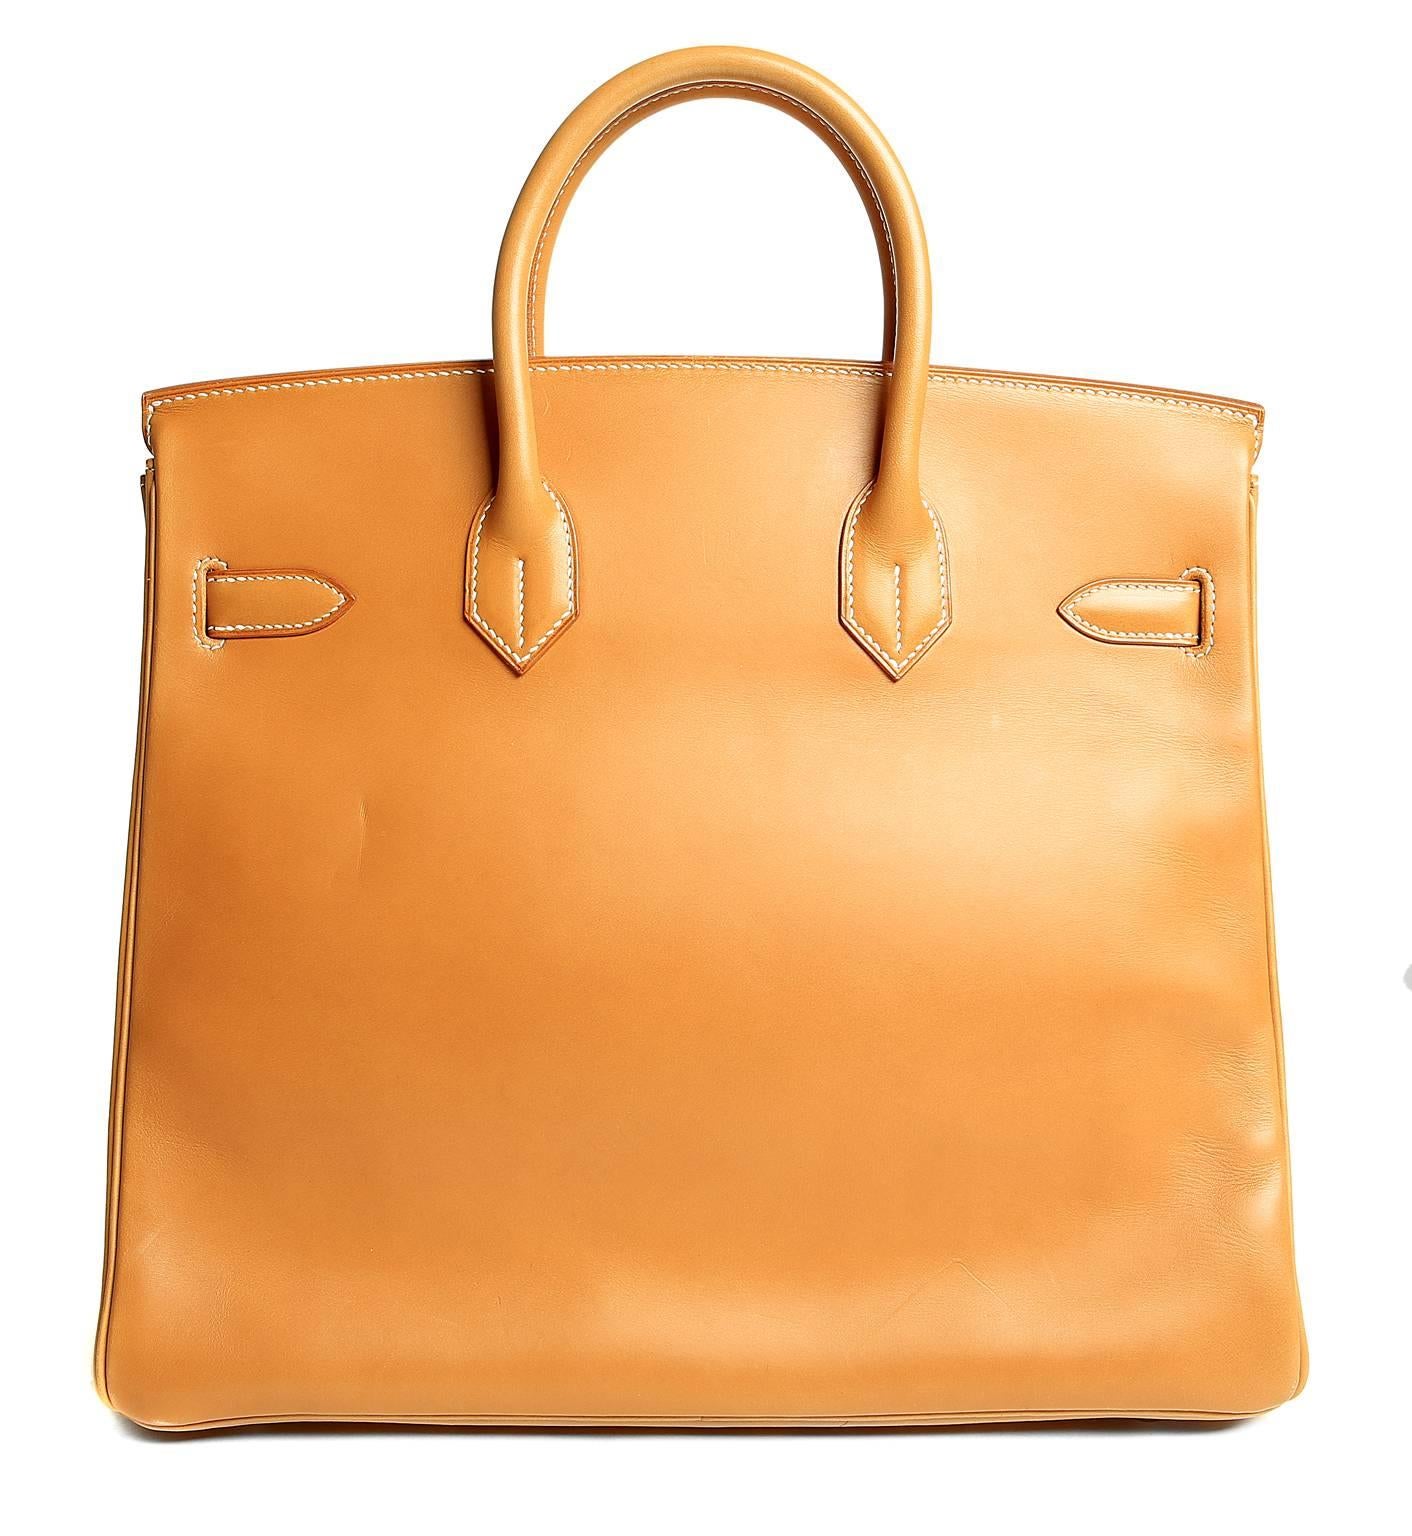 Hermès Barenia Natural 32 cm HAC  Birkin- PRISTINE;  appears never before carried.
 Considered the ultimate luxury item the world over and hand stitched by skilled craftsmen, wait lists of a year or more are commonplace for Hermès bags. The Haut